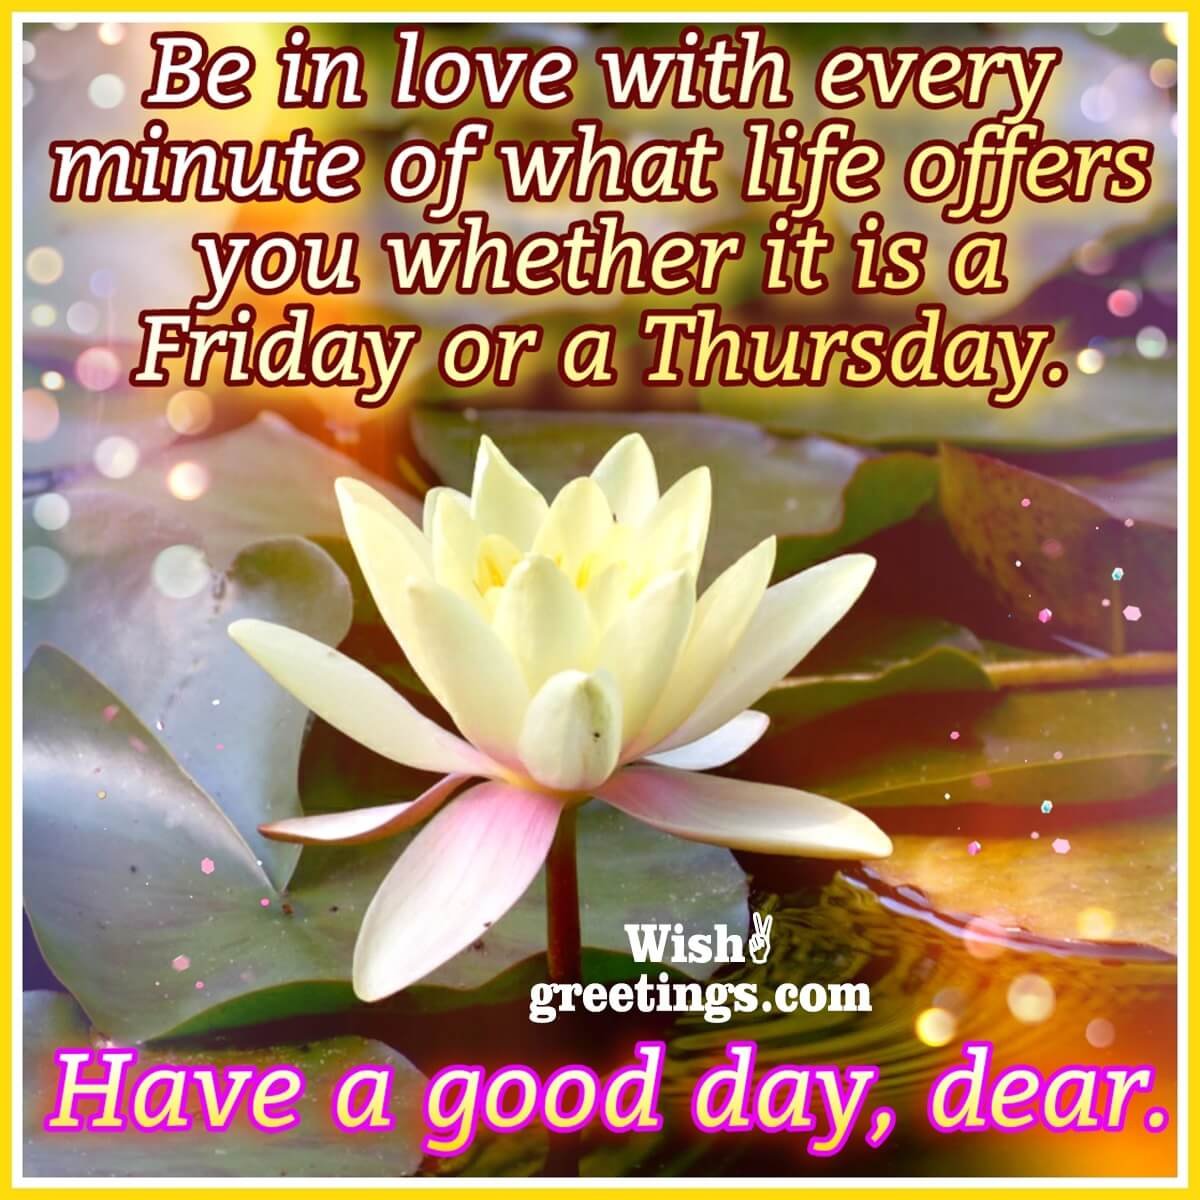 Good Day Wish Image For Thursday